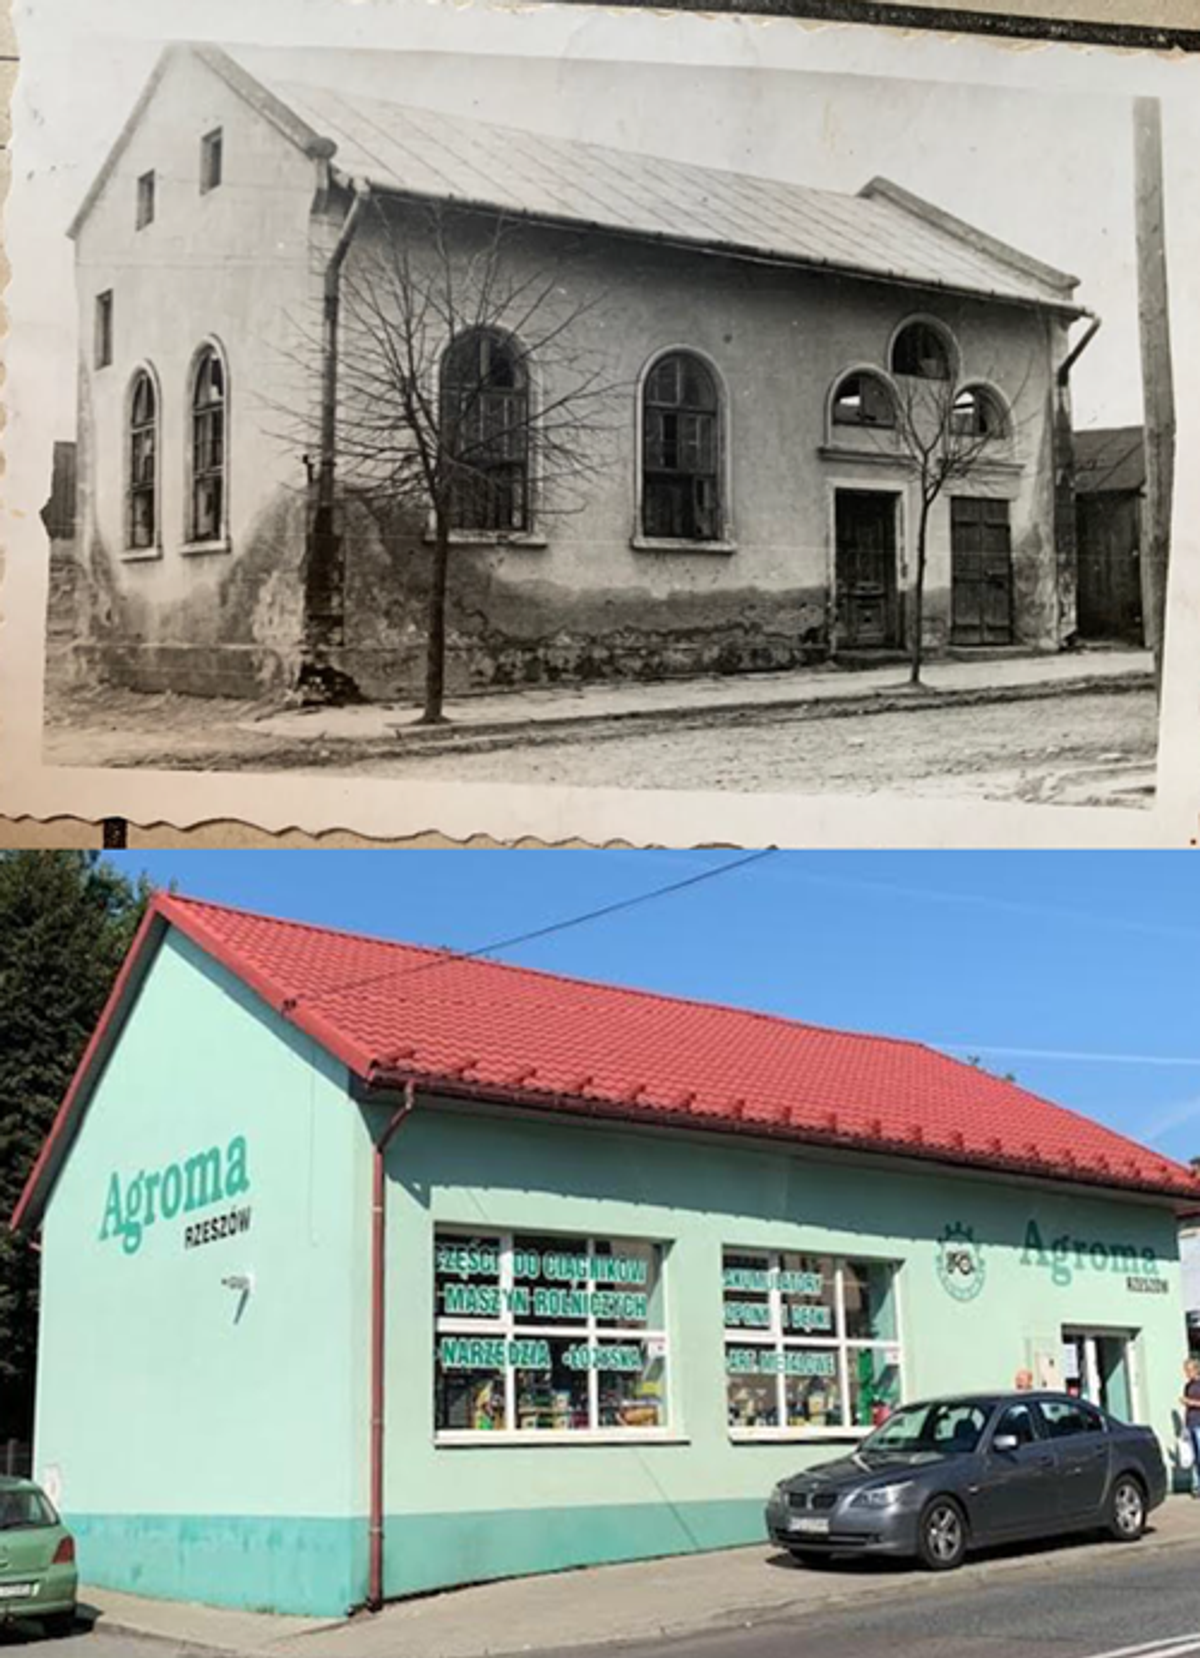 Intersection of Sawicki and Wegierska streets, in 1941 (top) and in 2019 (bottom). Then, it was a synagogue, now it’s a store. (Courtesy Collection of the Switalski Family)